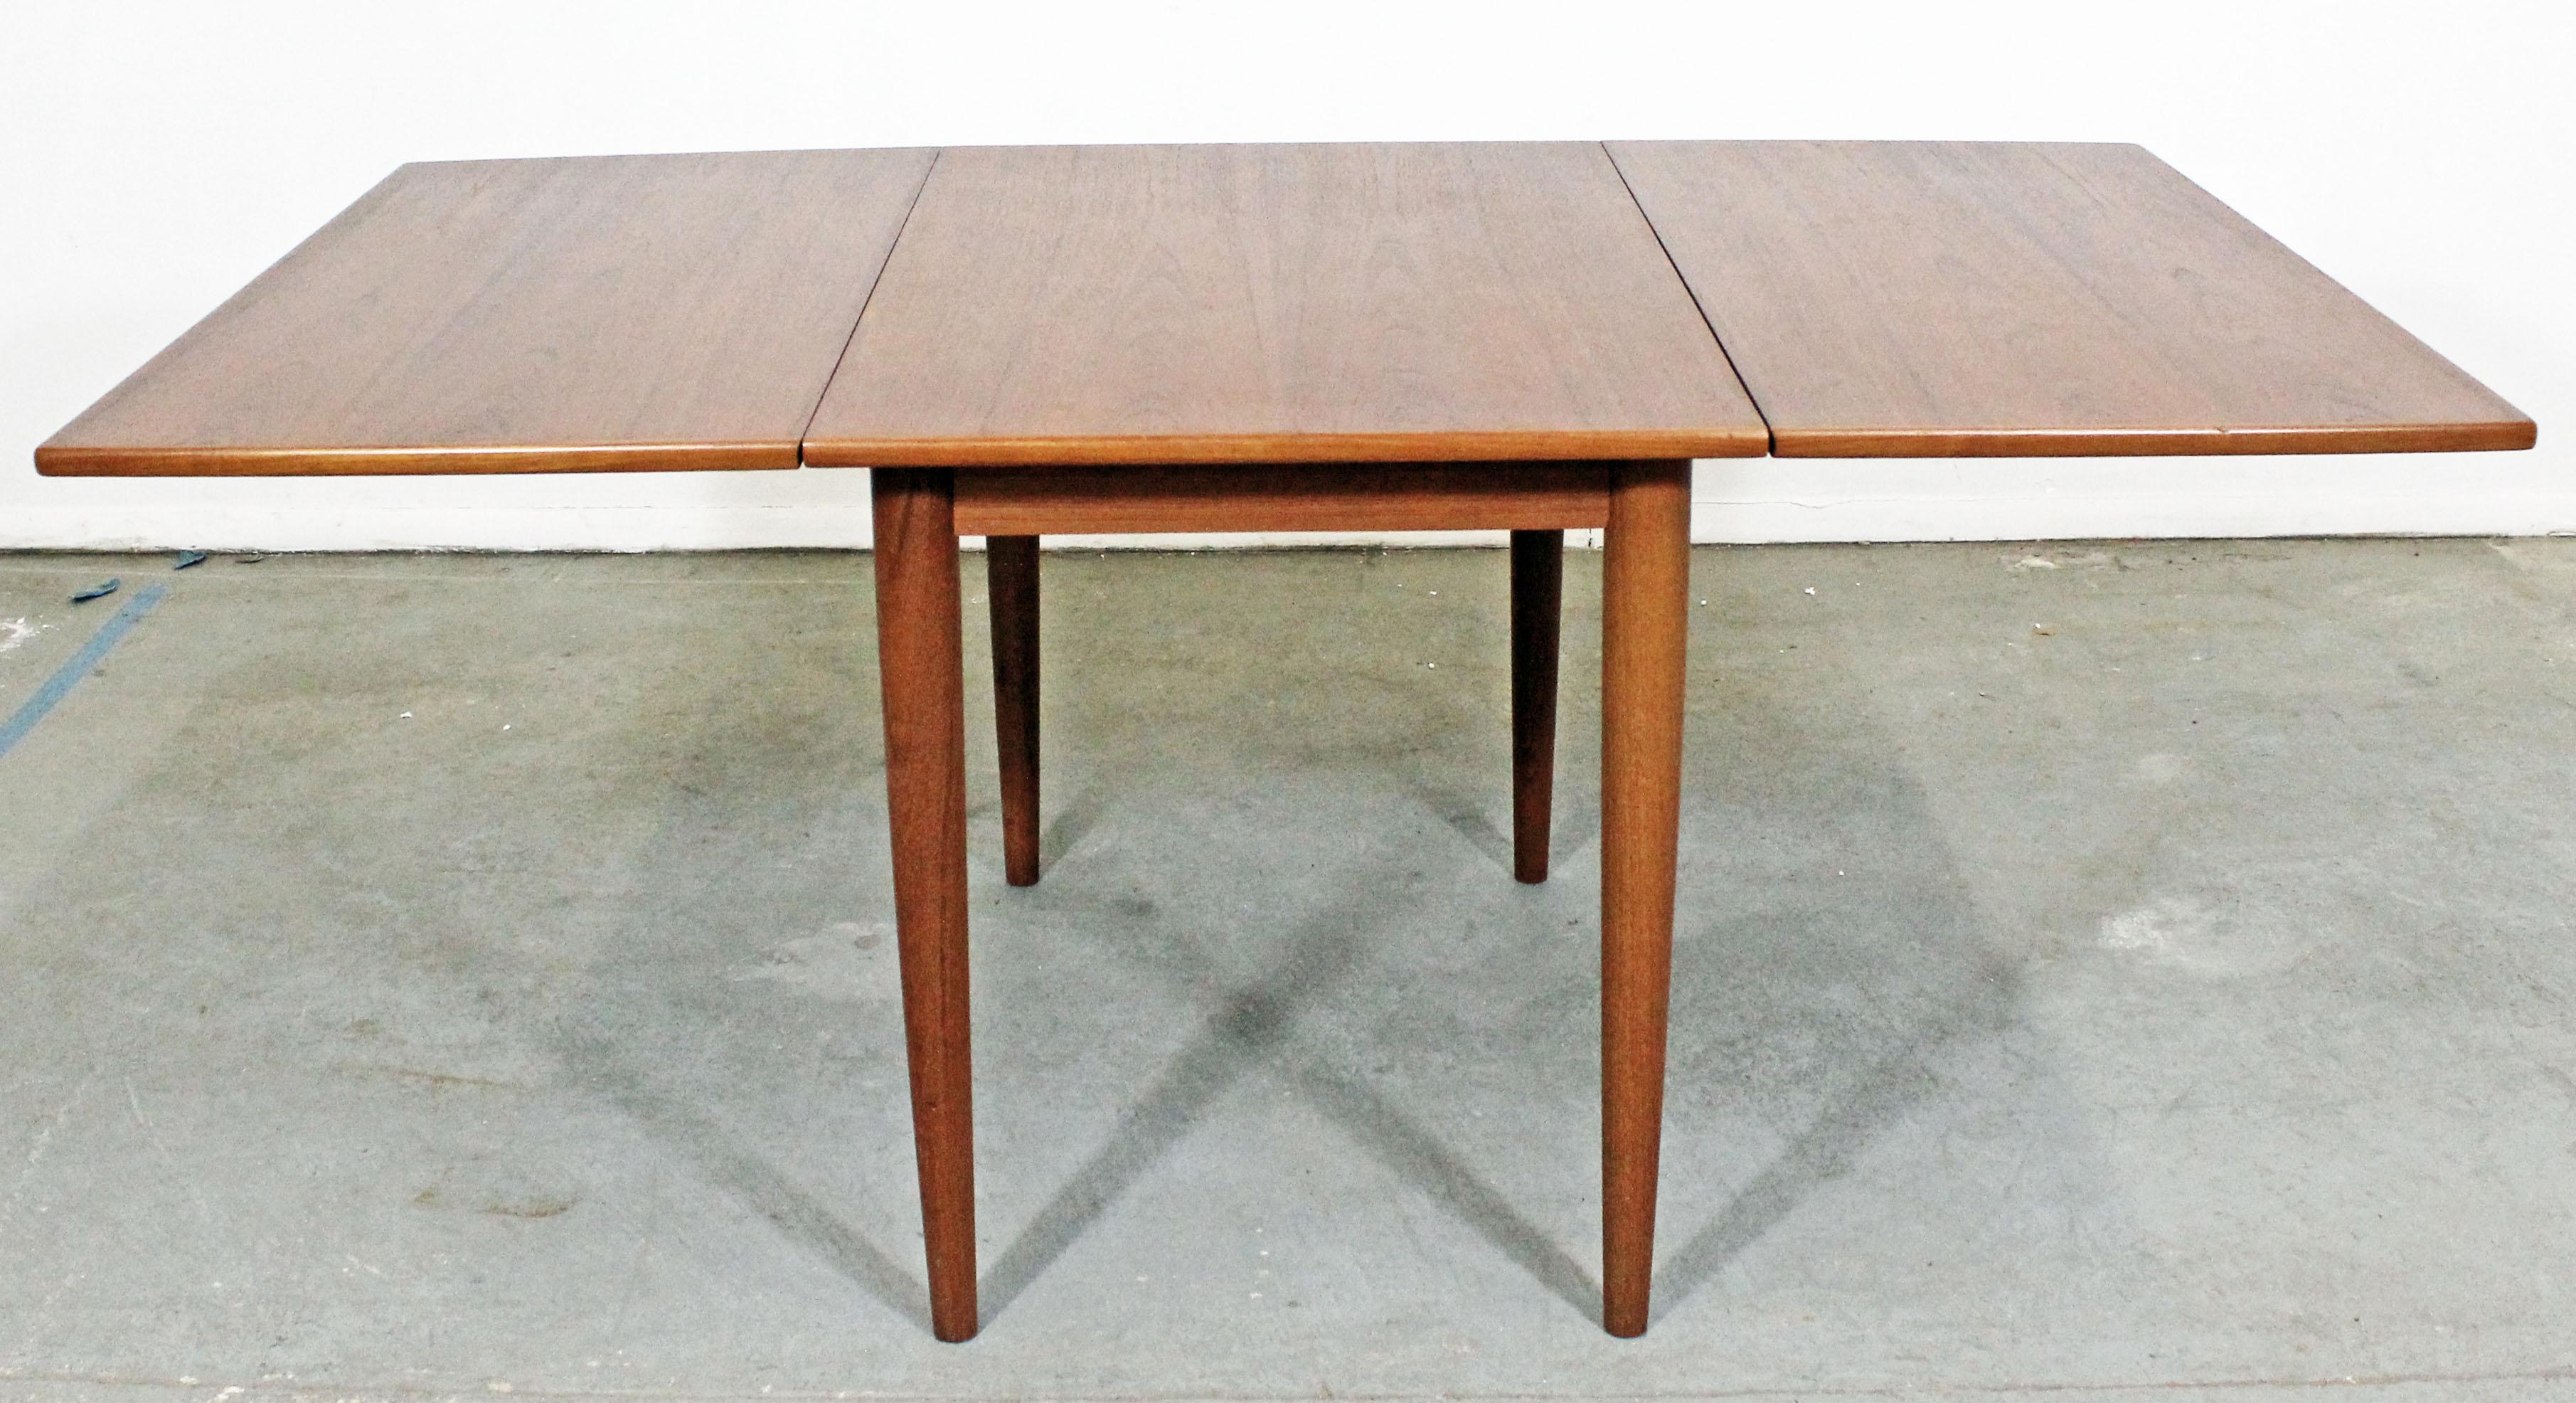 Teak drop-leaf dining table made by Skovmand & Andersen for Moreddi. Has been refinished.

Approximate dimensions:
Fully open: 63.25